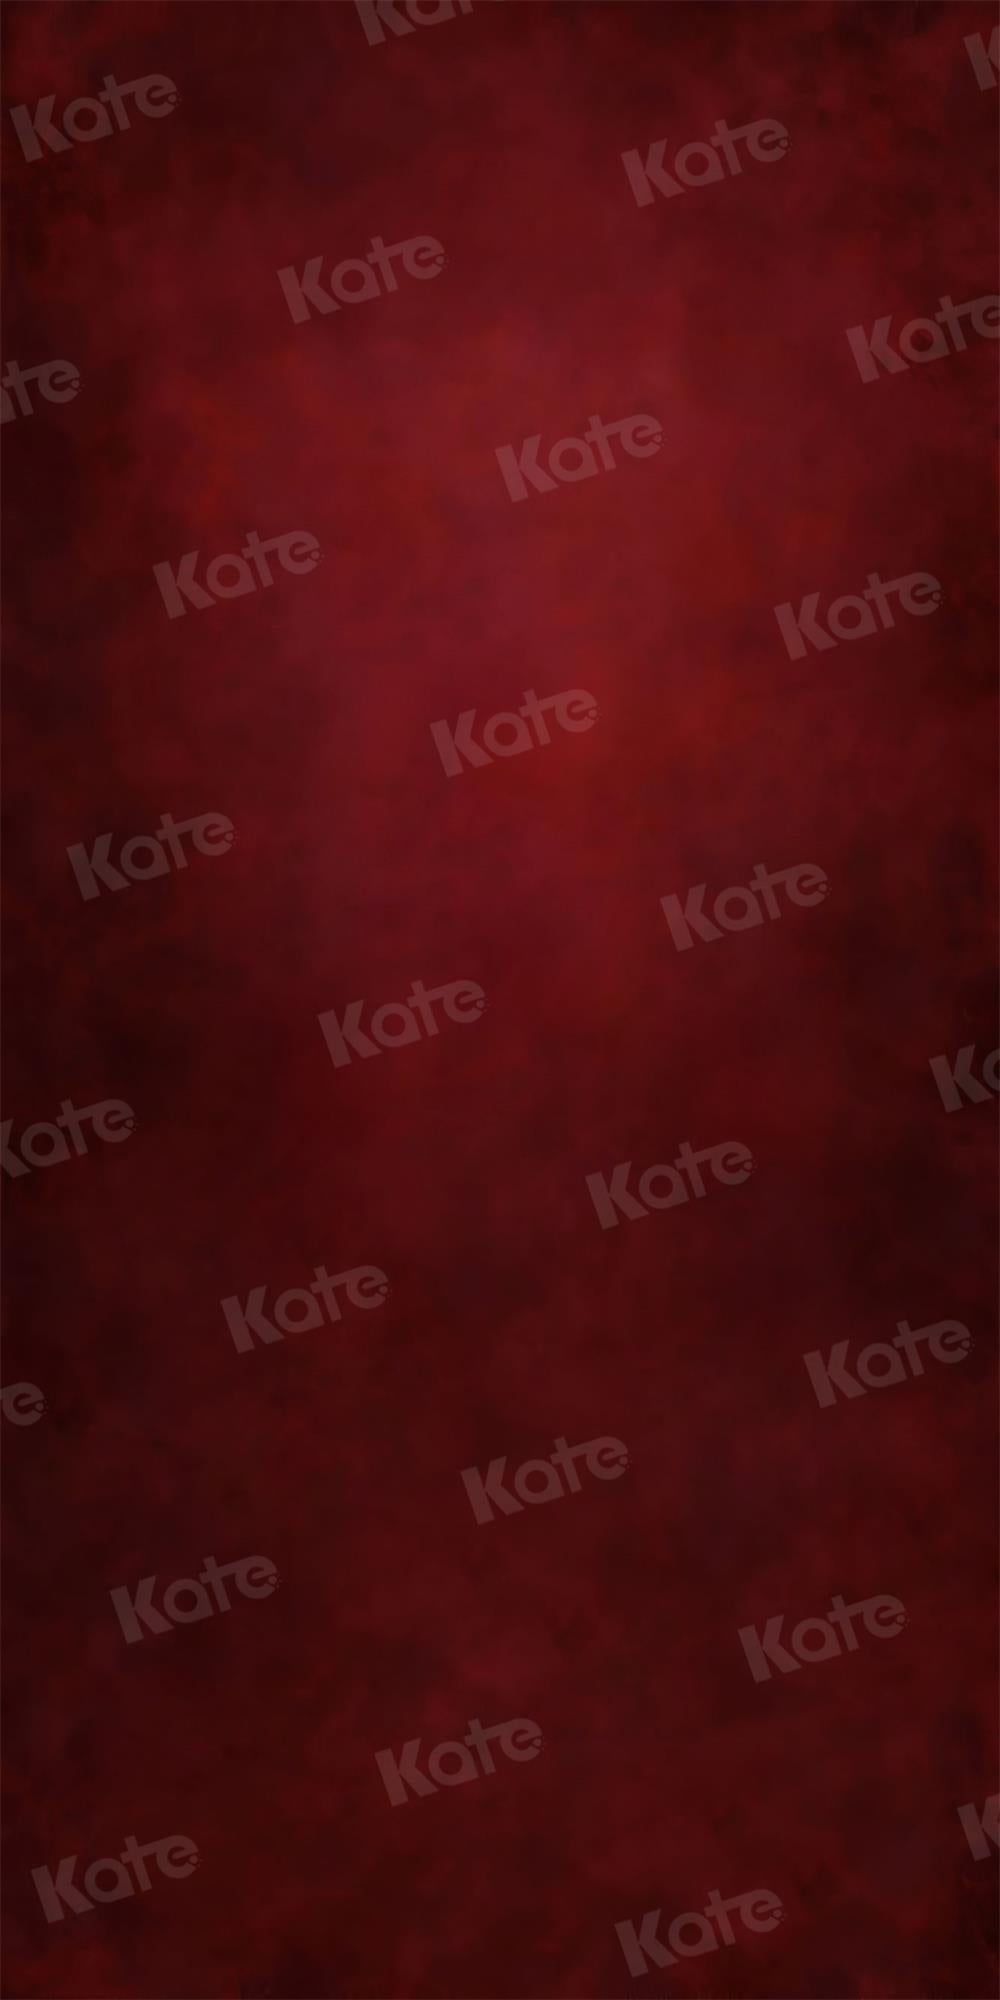 Kate Sweep Backdrop Red Portrait Abstract For Photography